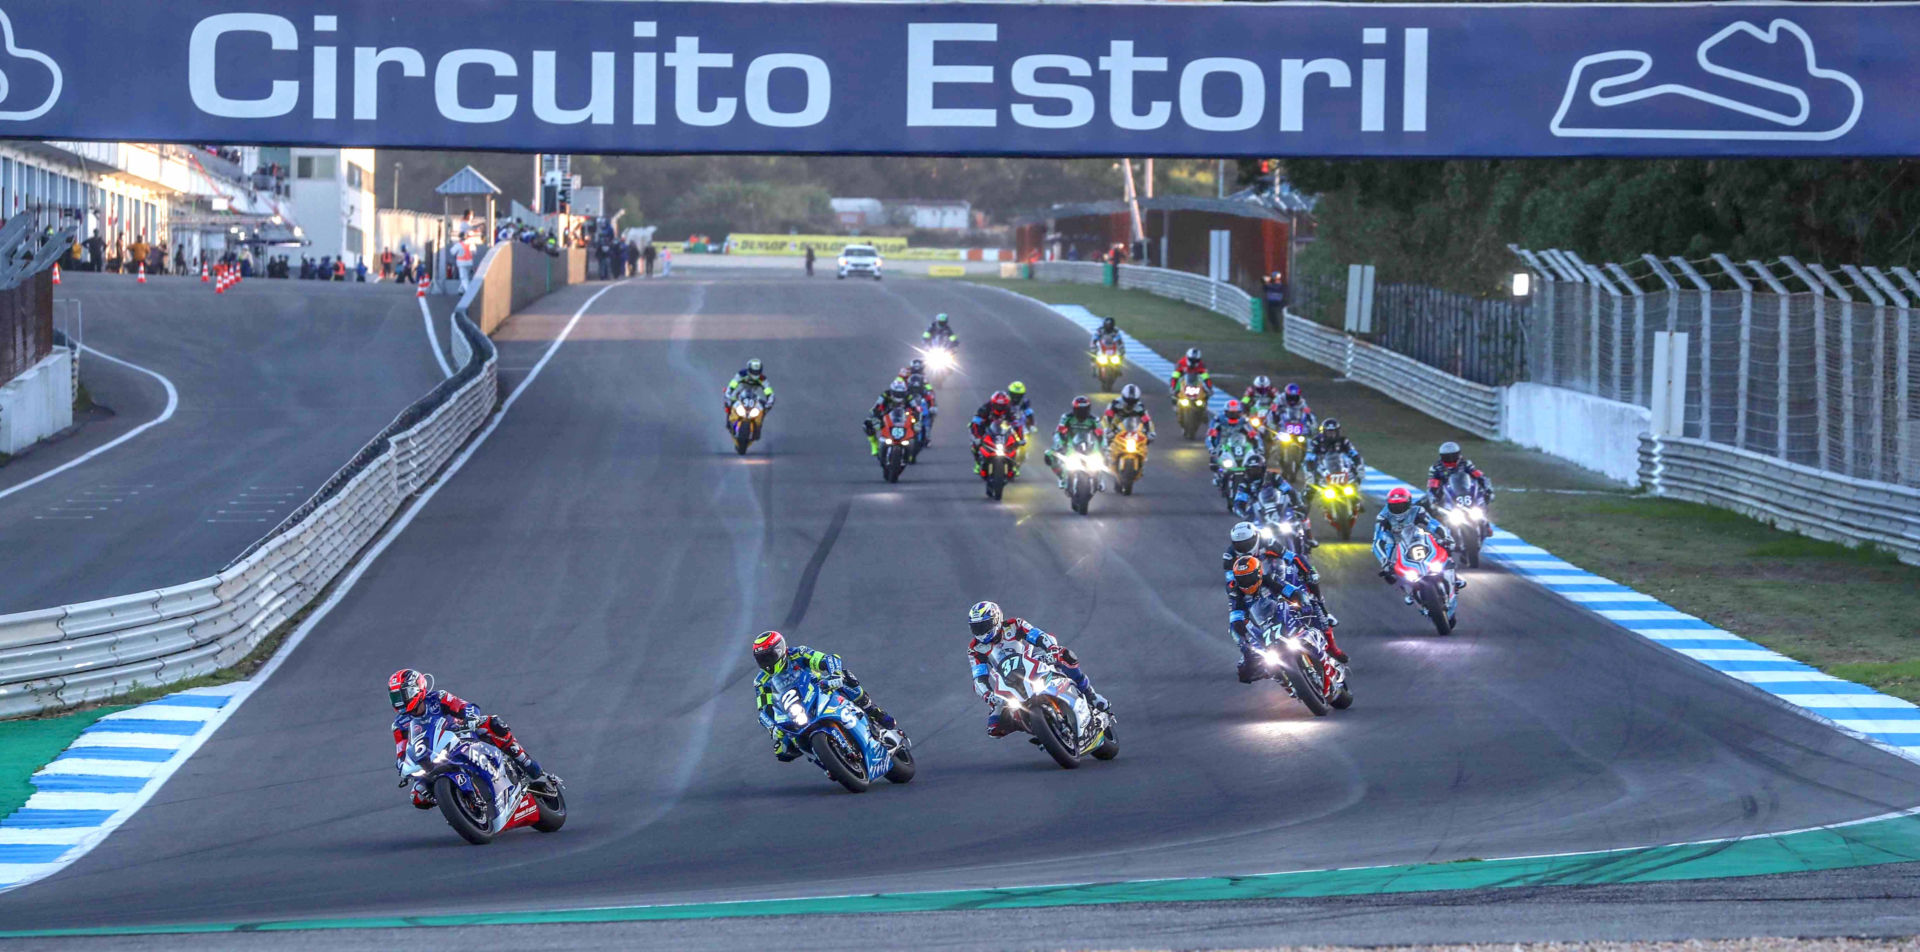 The start of the 12 Hours of Estoril FIM Endurance World Championship race in 2020. Photo courtesy Eurosport Events.